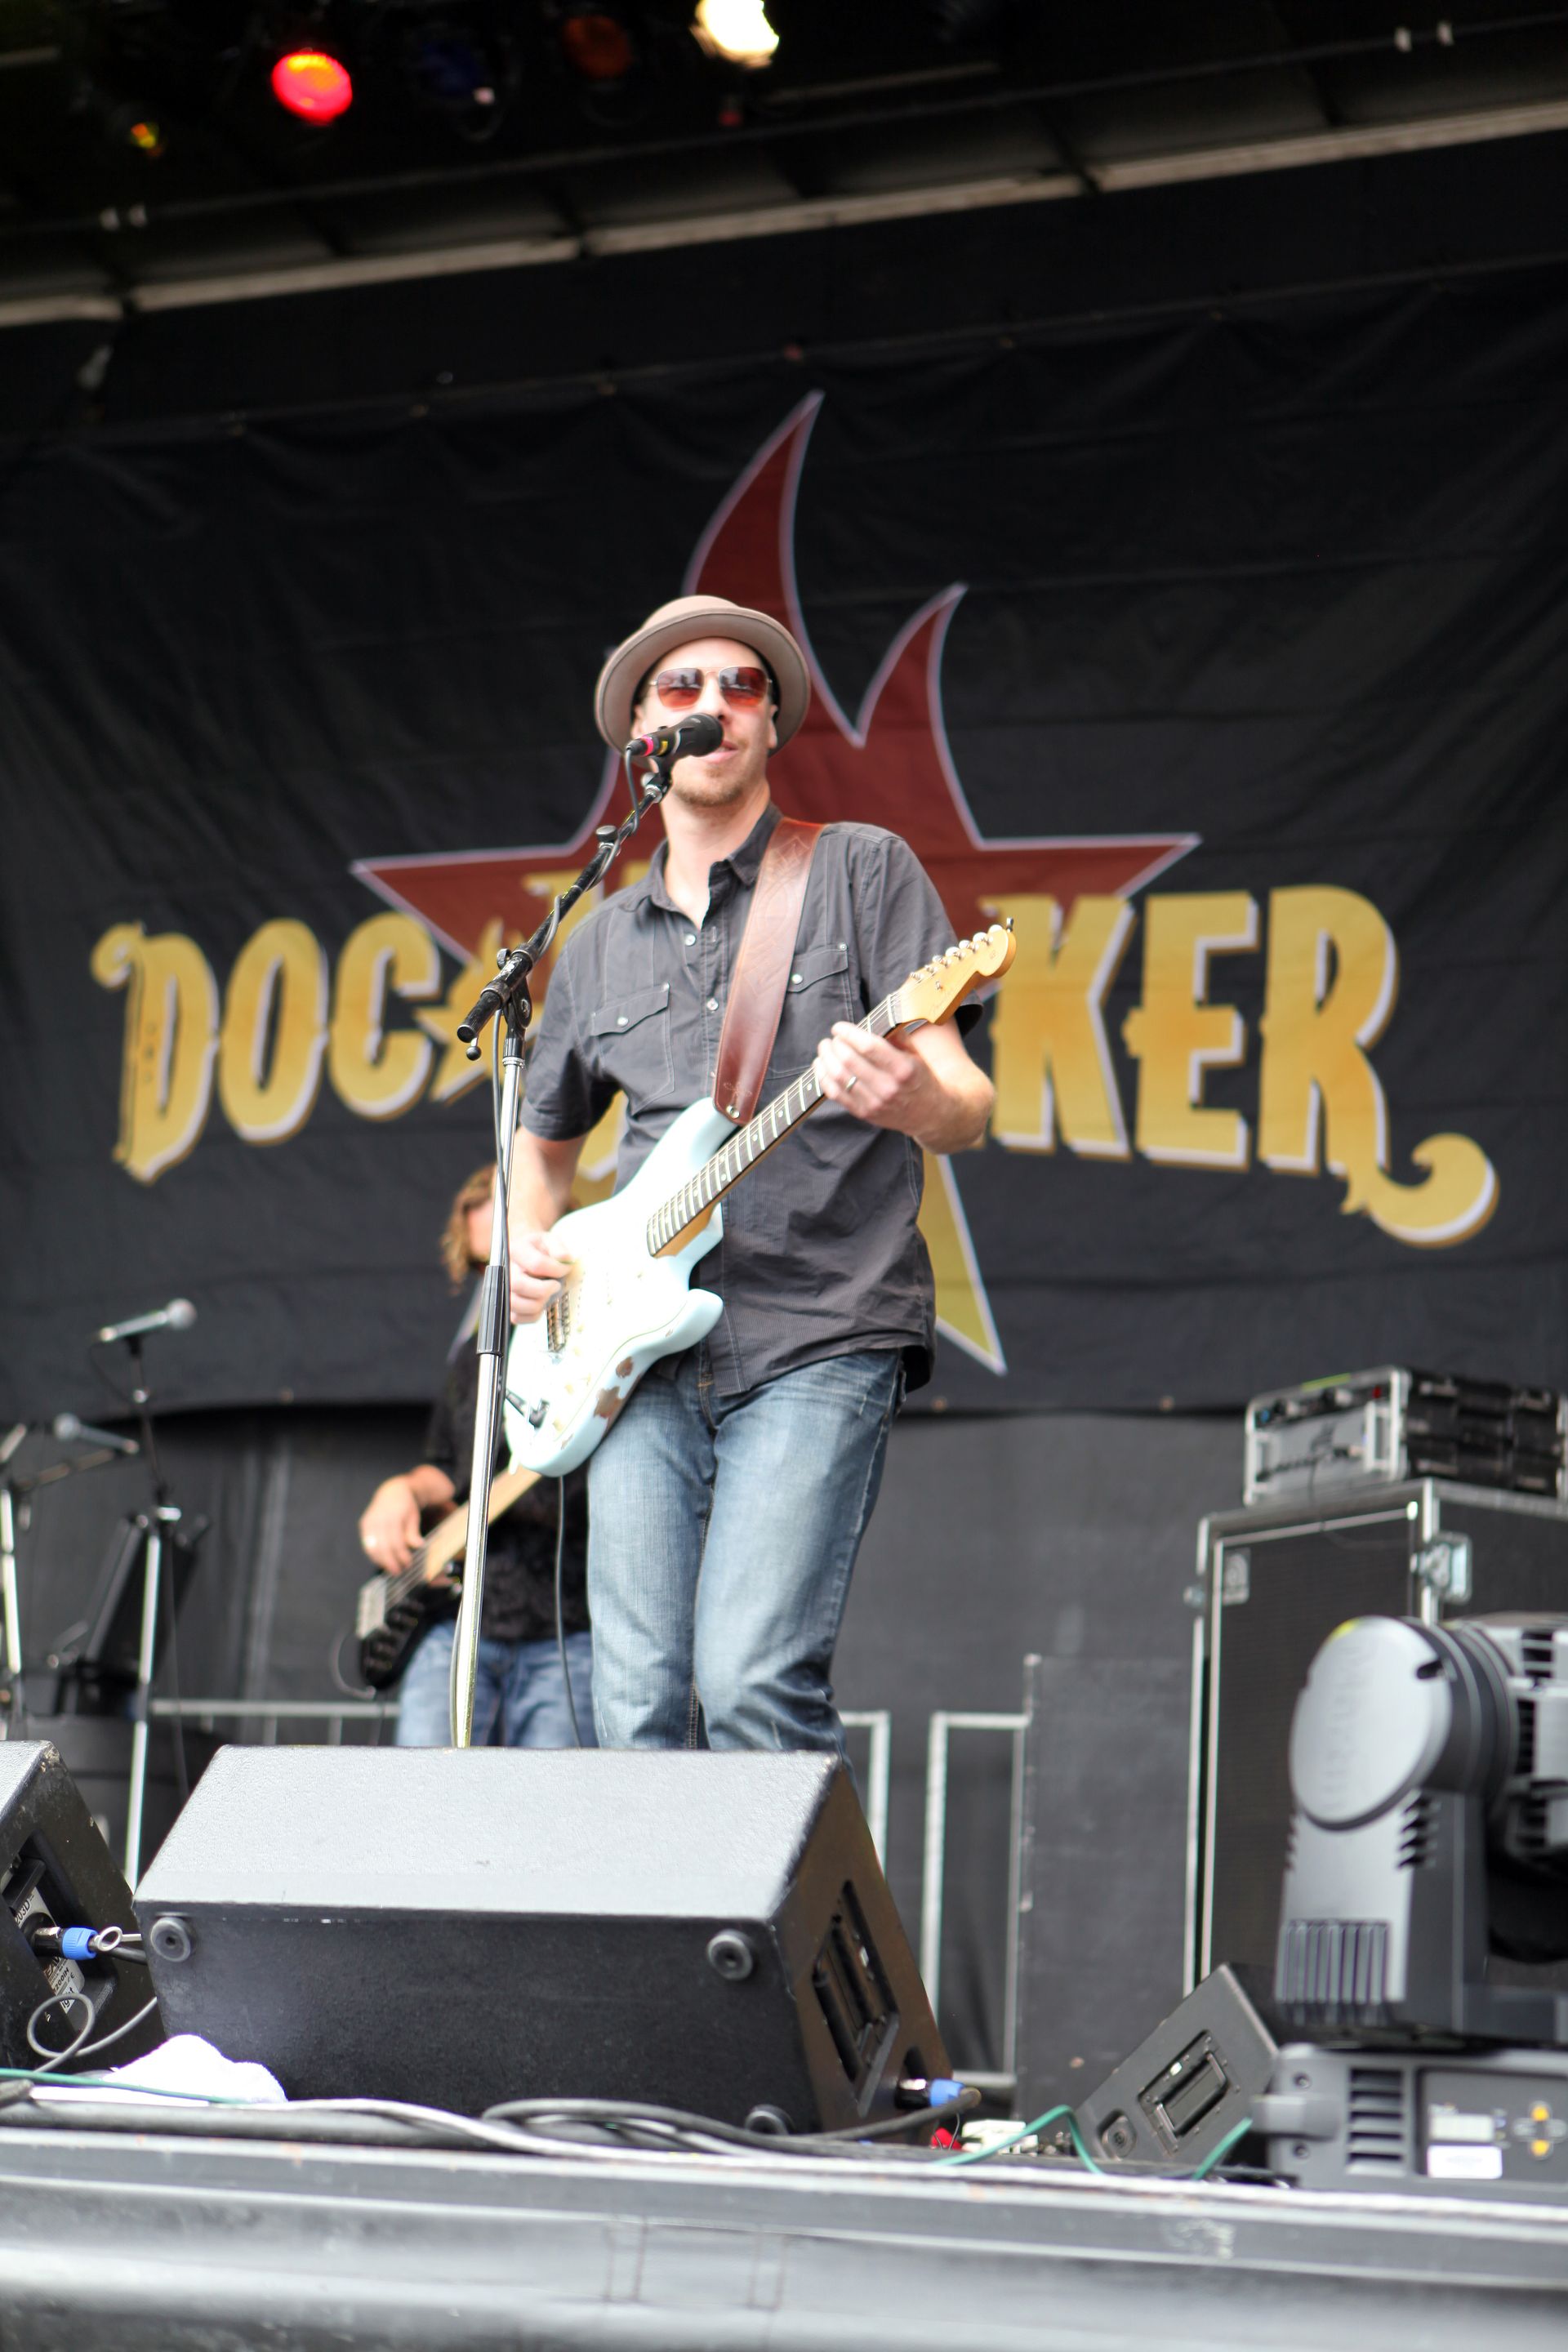 Canadian band, Doc Walker, performs at a Calgary Stampede event